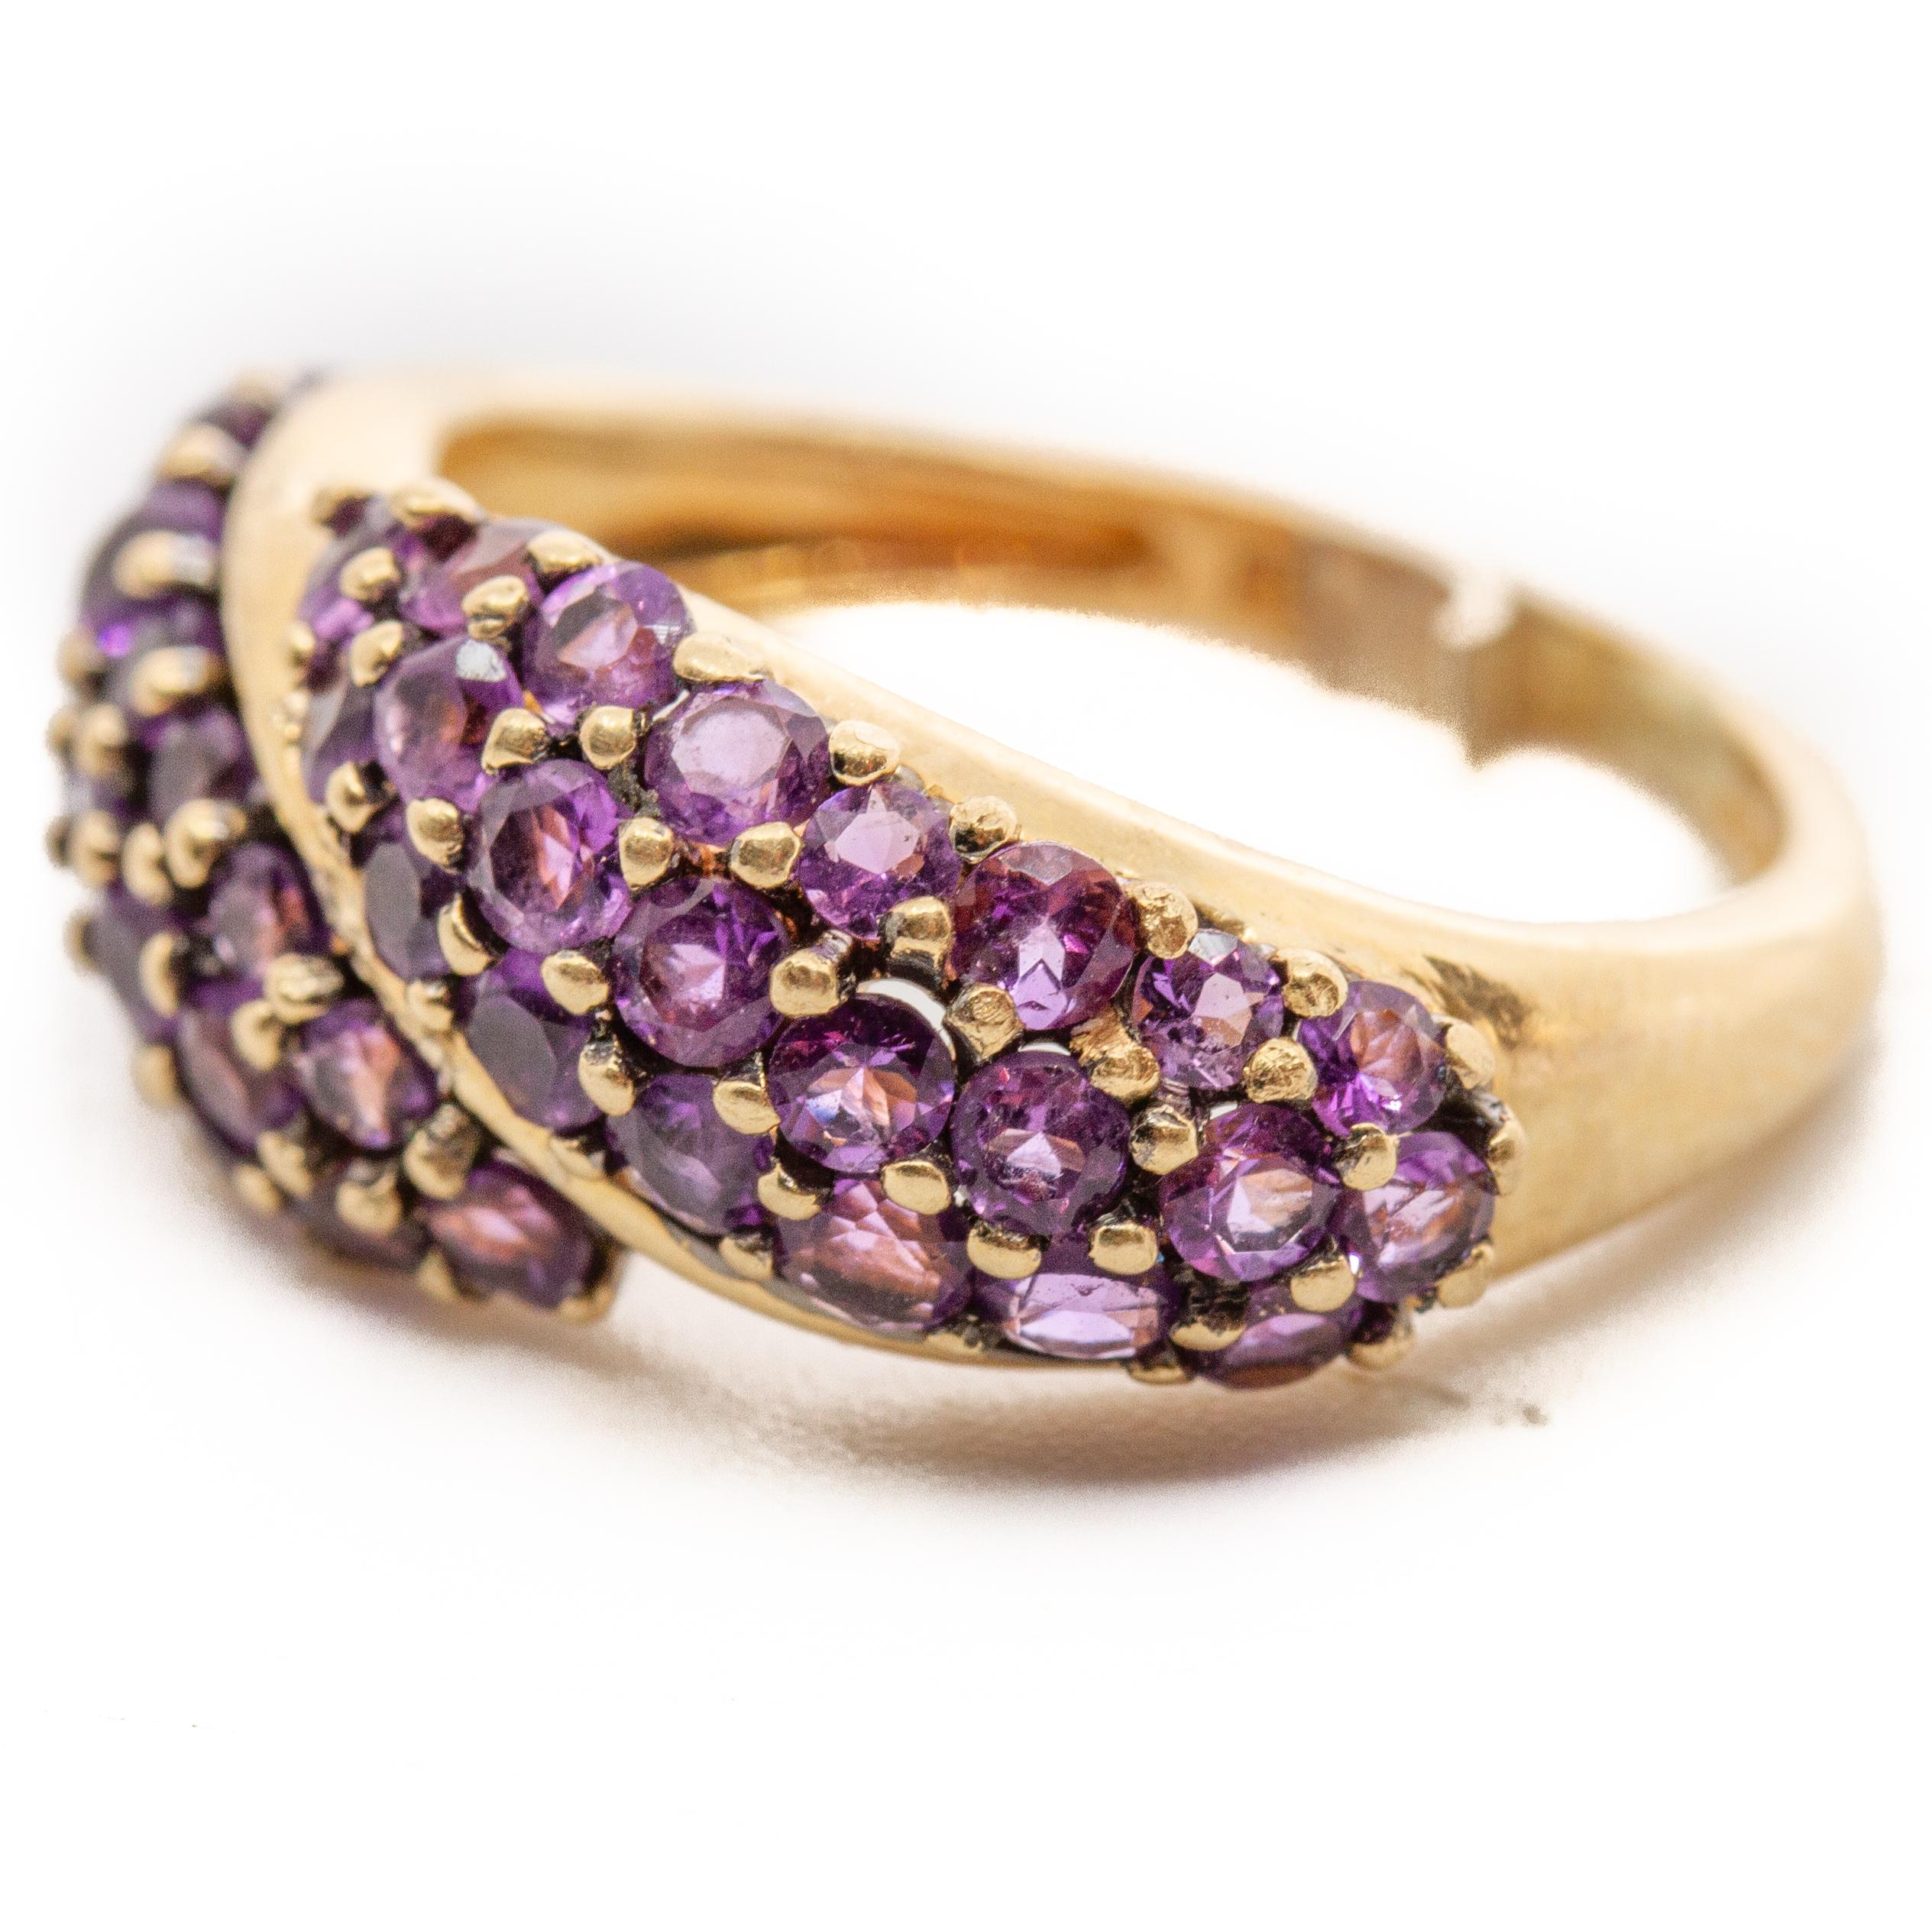 Vintage 14k gold ring set with amethyst. Size approx. 6.25. Weight approx. 2.5 dwt